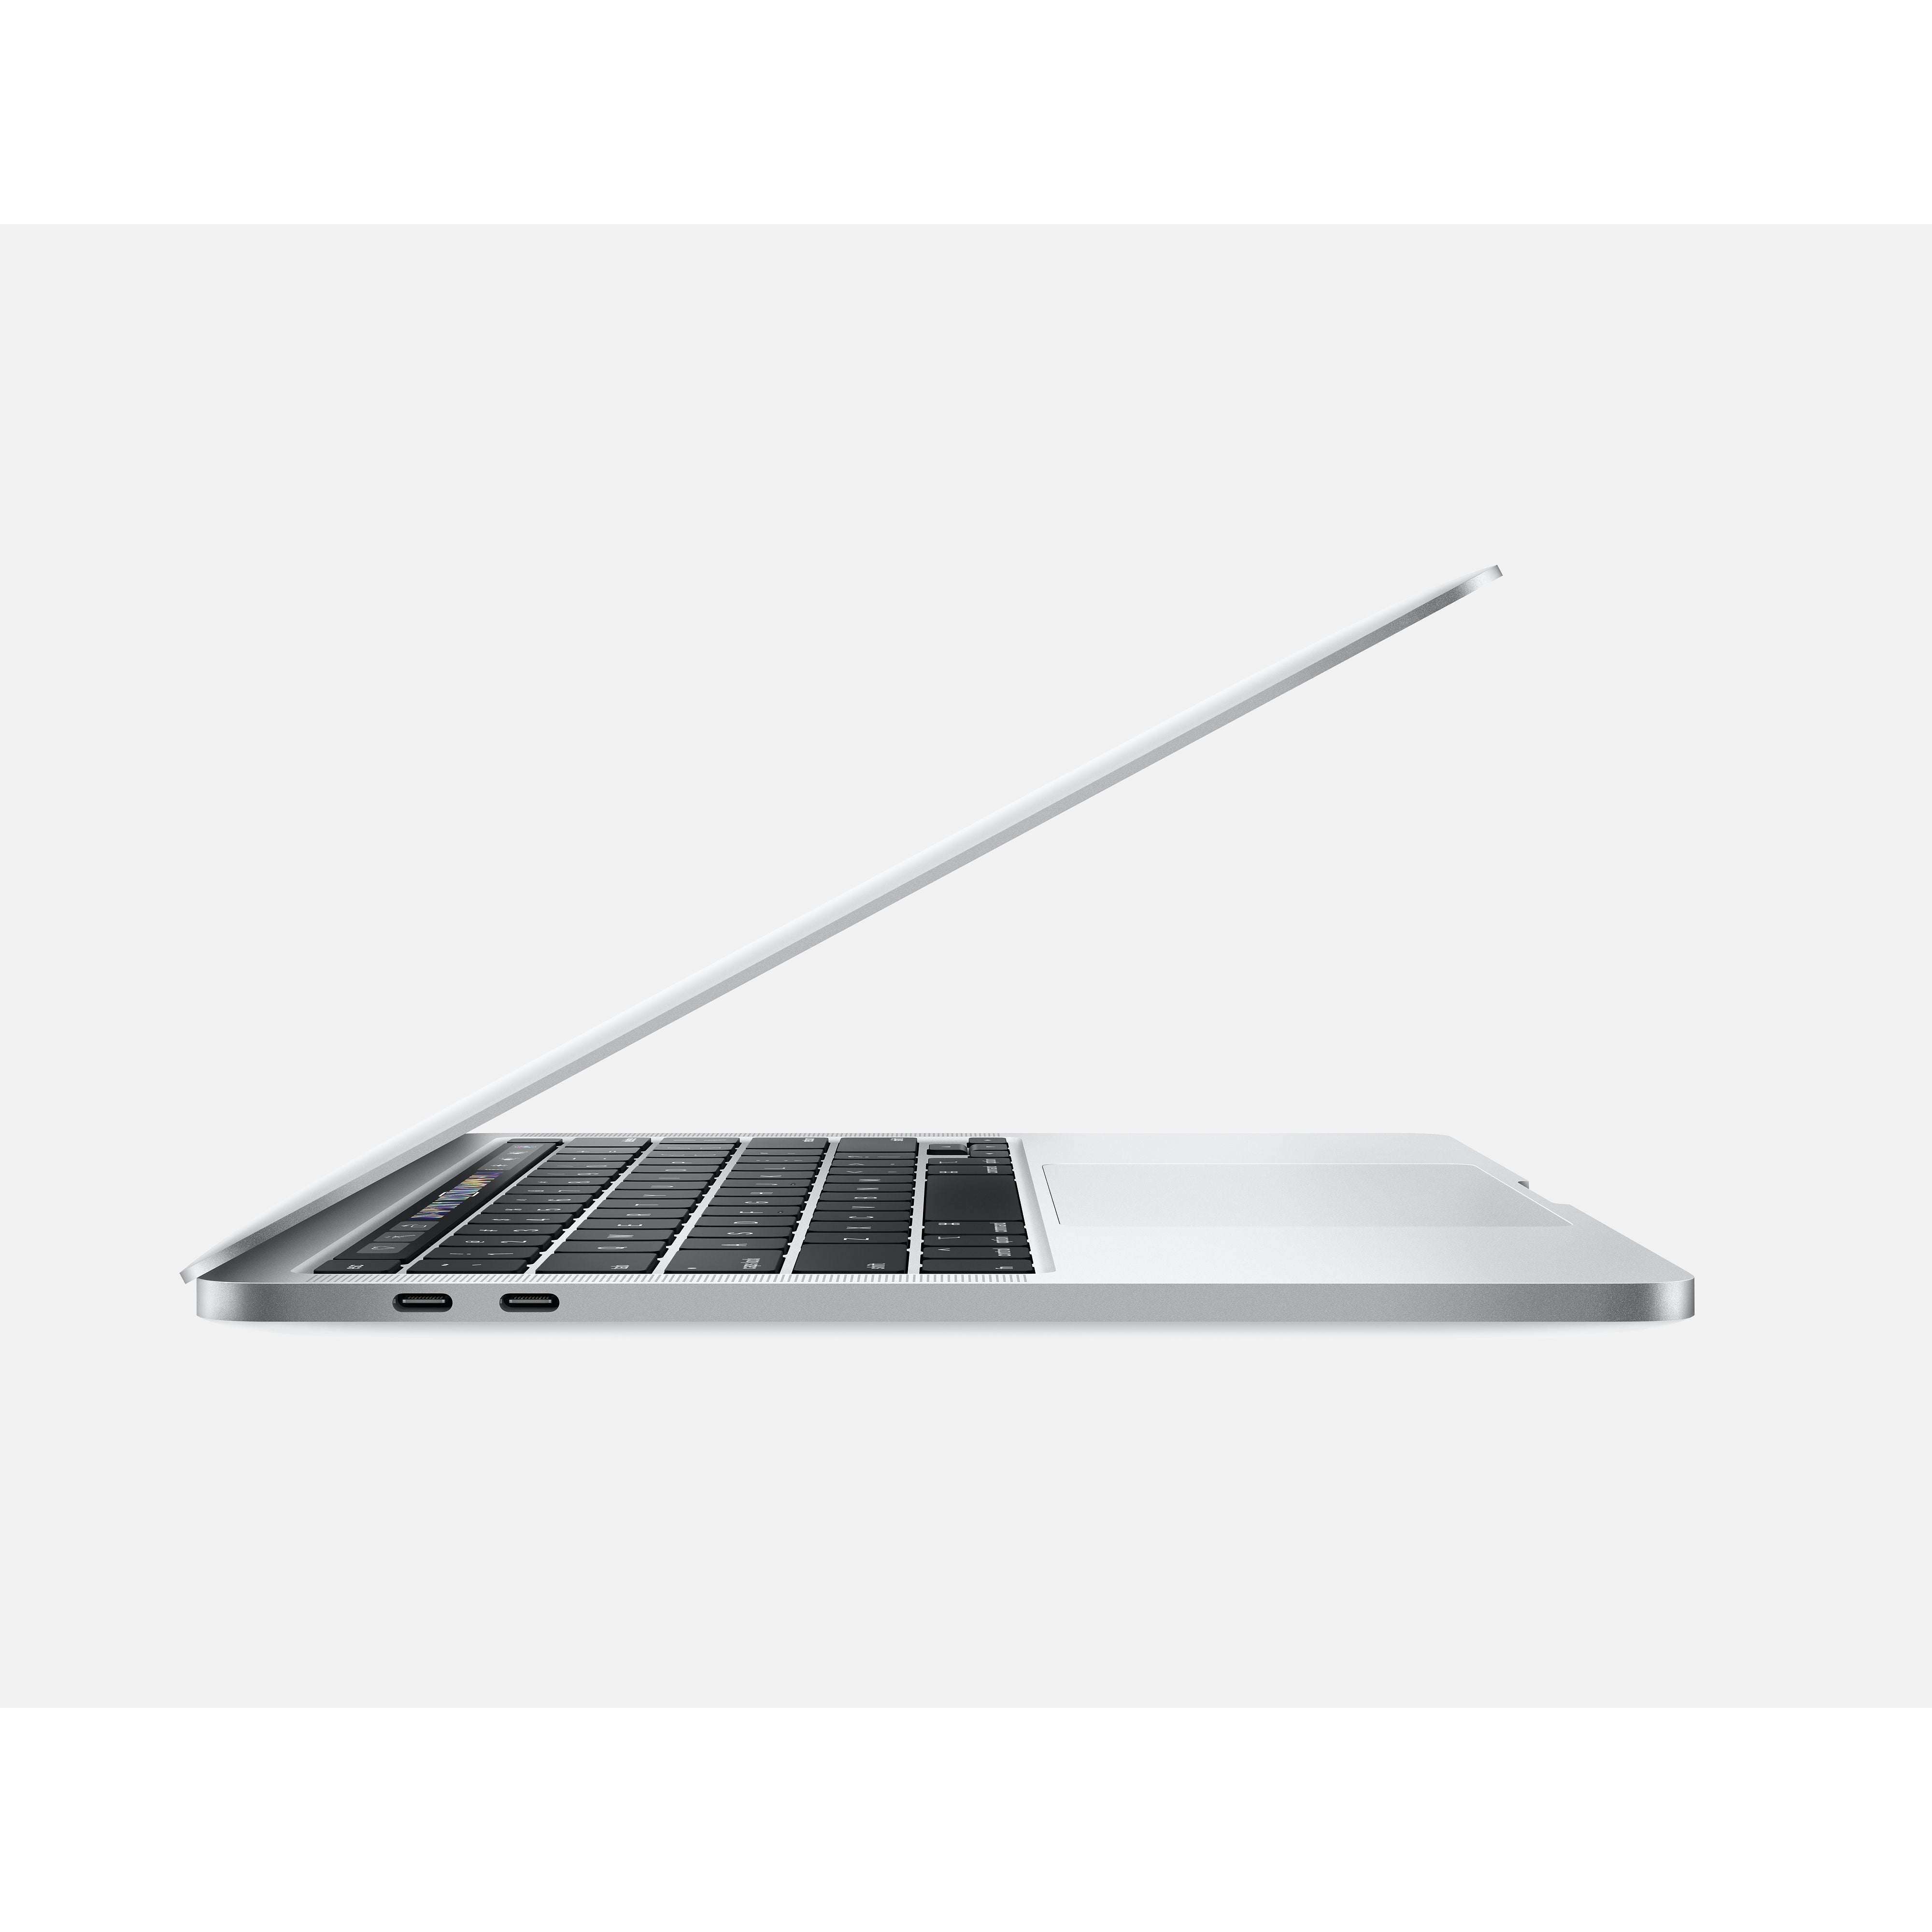 Apple MacBook Pro 13-inch Laptop with Touch Bar 2.0GHz Dual-Core i5 8G